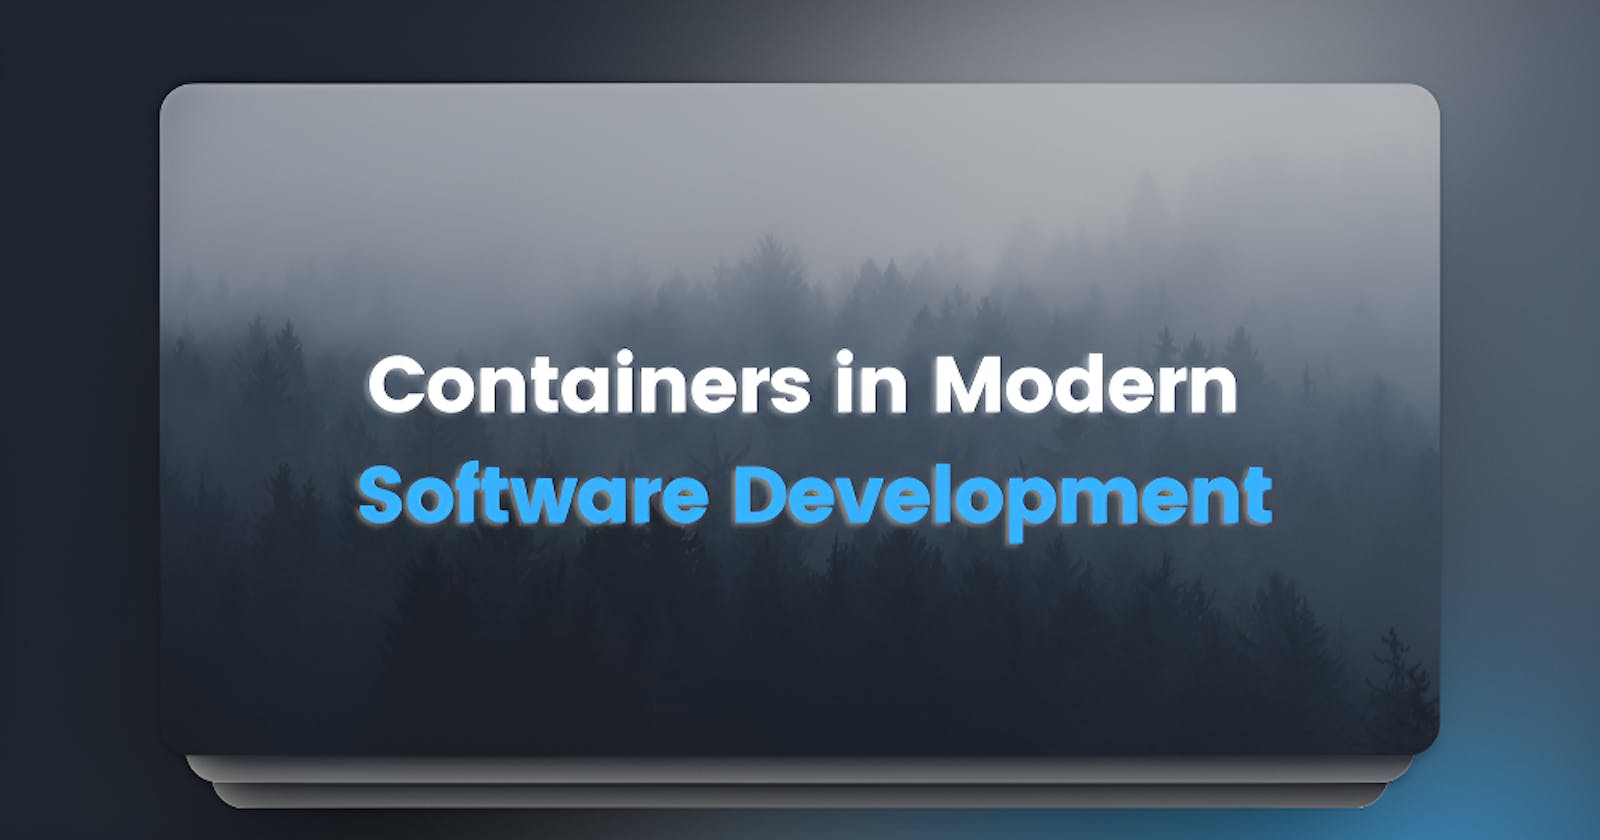 The Role of Containers in Modern Software Development